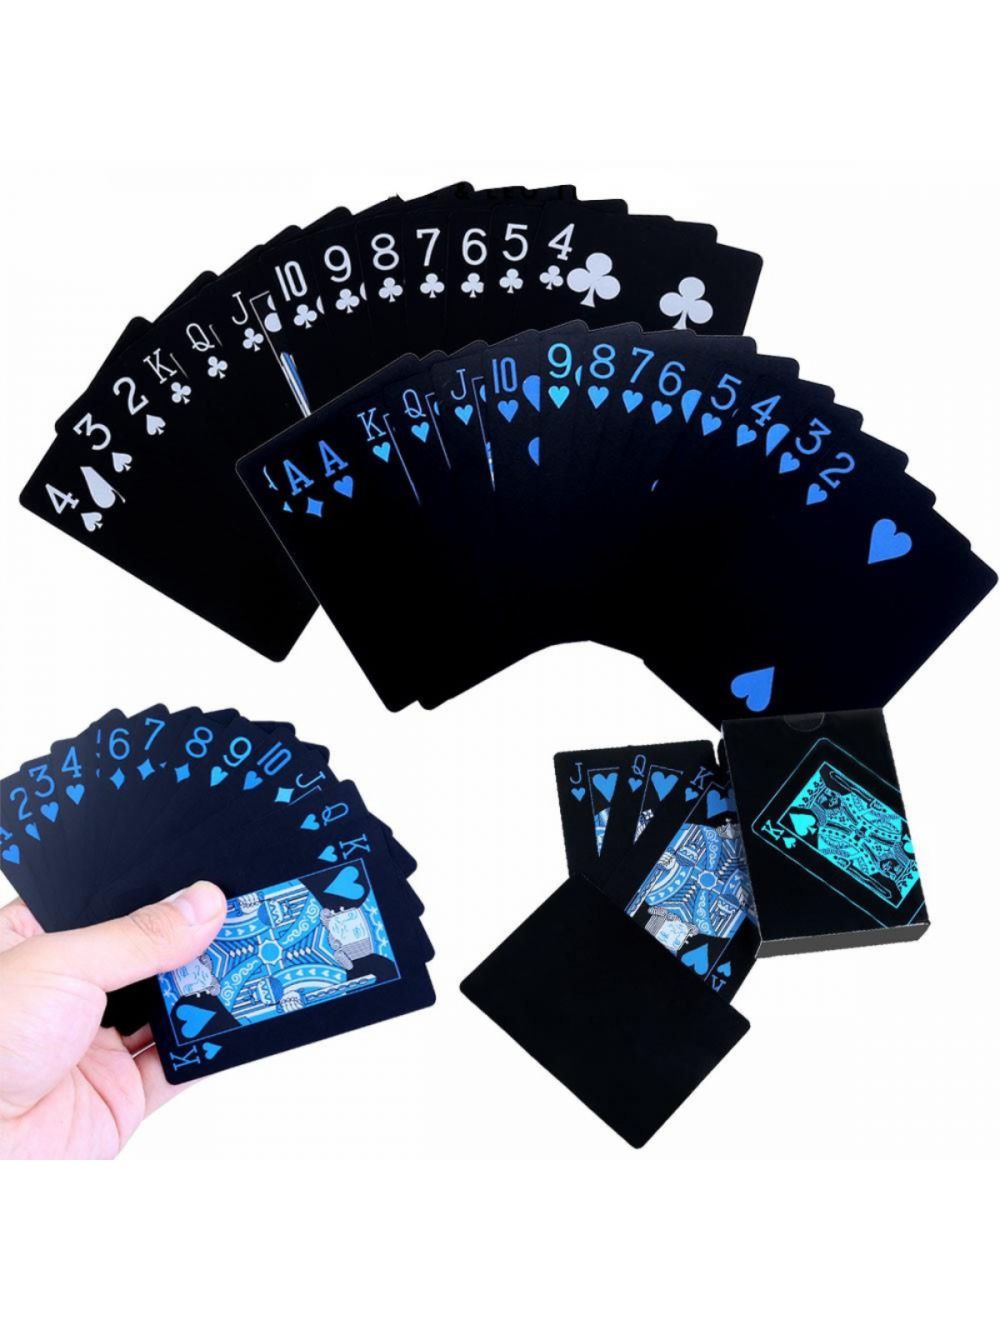 2 Decks of Plastic Poker Cards 100% Waterproof Playing Cards PVC Cards 